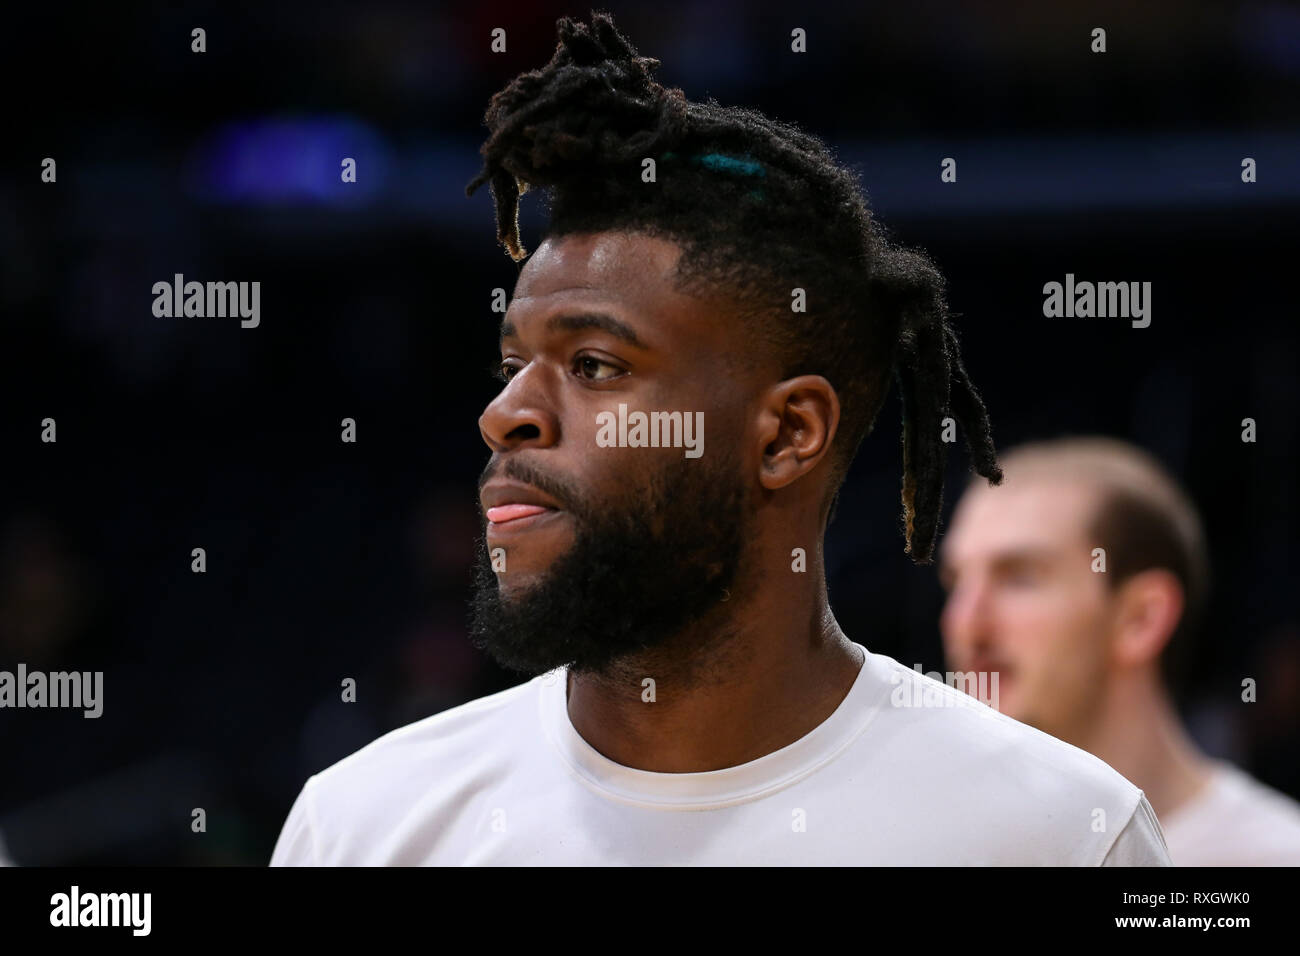 Los Angeles Lakers guard Reggie Bullock #35 during the Boston Celtics vs Los Angeles Lakers game at Staples Center in Los Angeles, CA on March 09, 2019. (Photo by Jevone Moore) Stock Photo